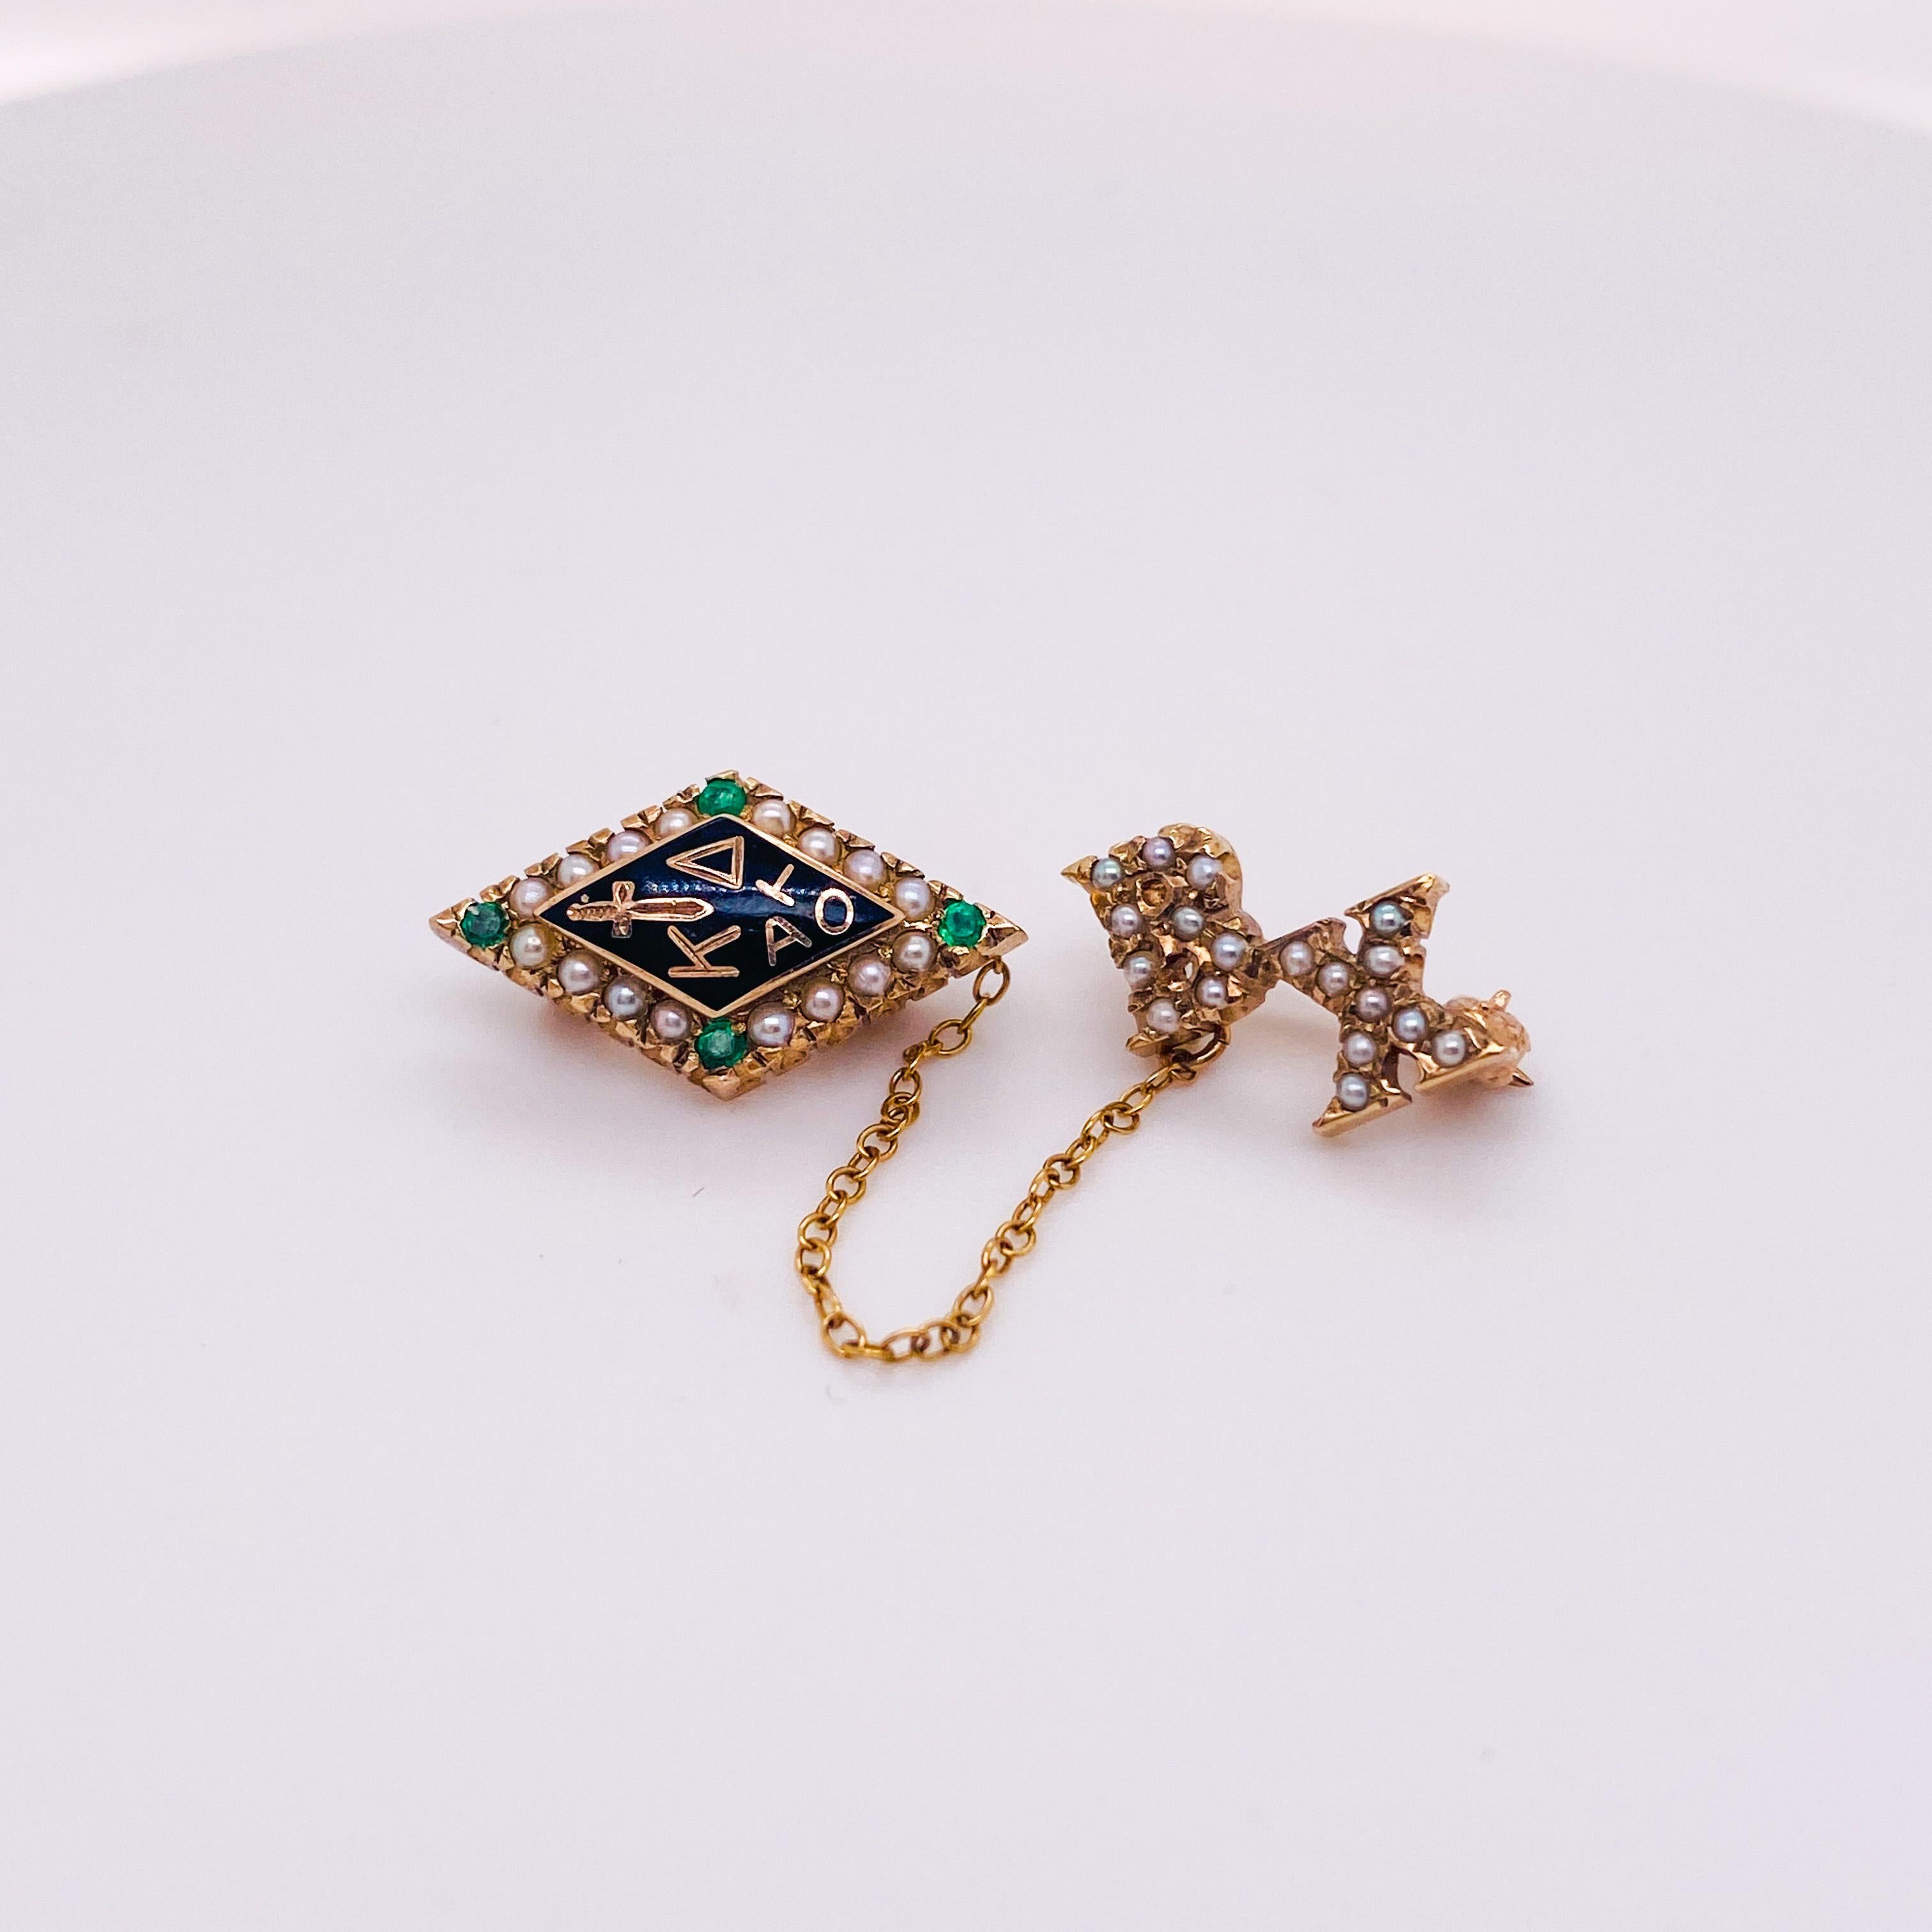 This pin is an estate piece with a beautiful history. The pin represents the Kappa Delta (KD) sorority, originally founded in 1897. The Alpha Phi sorority partners with the Girl Scouts of America and believe in making lifetime friendships and